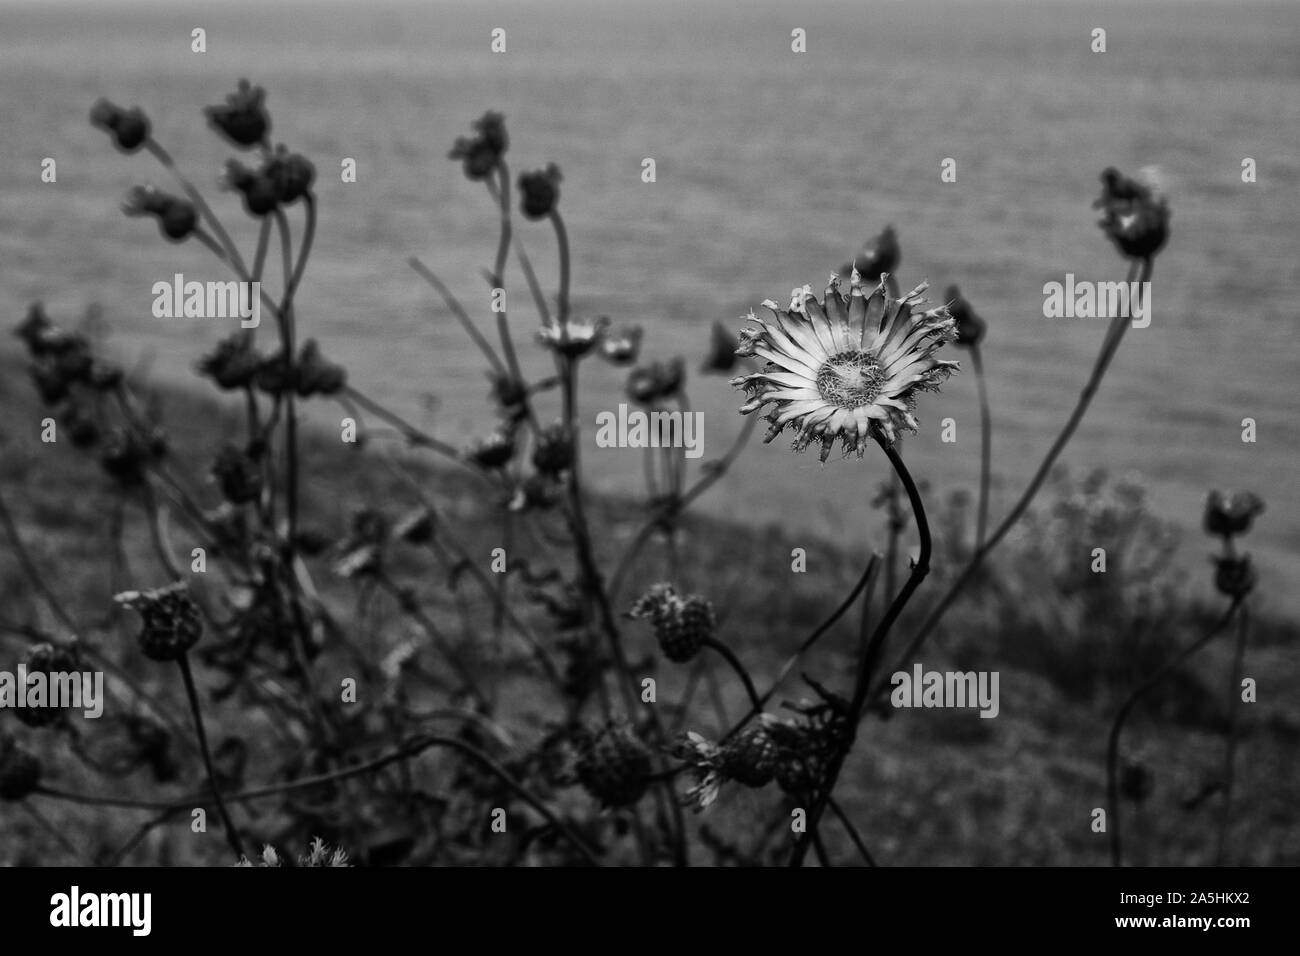 black and white image of a ragged, rough looking daisy like flower on the coast with the sea in the background Stock Photo